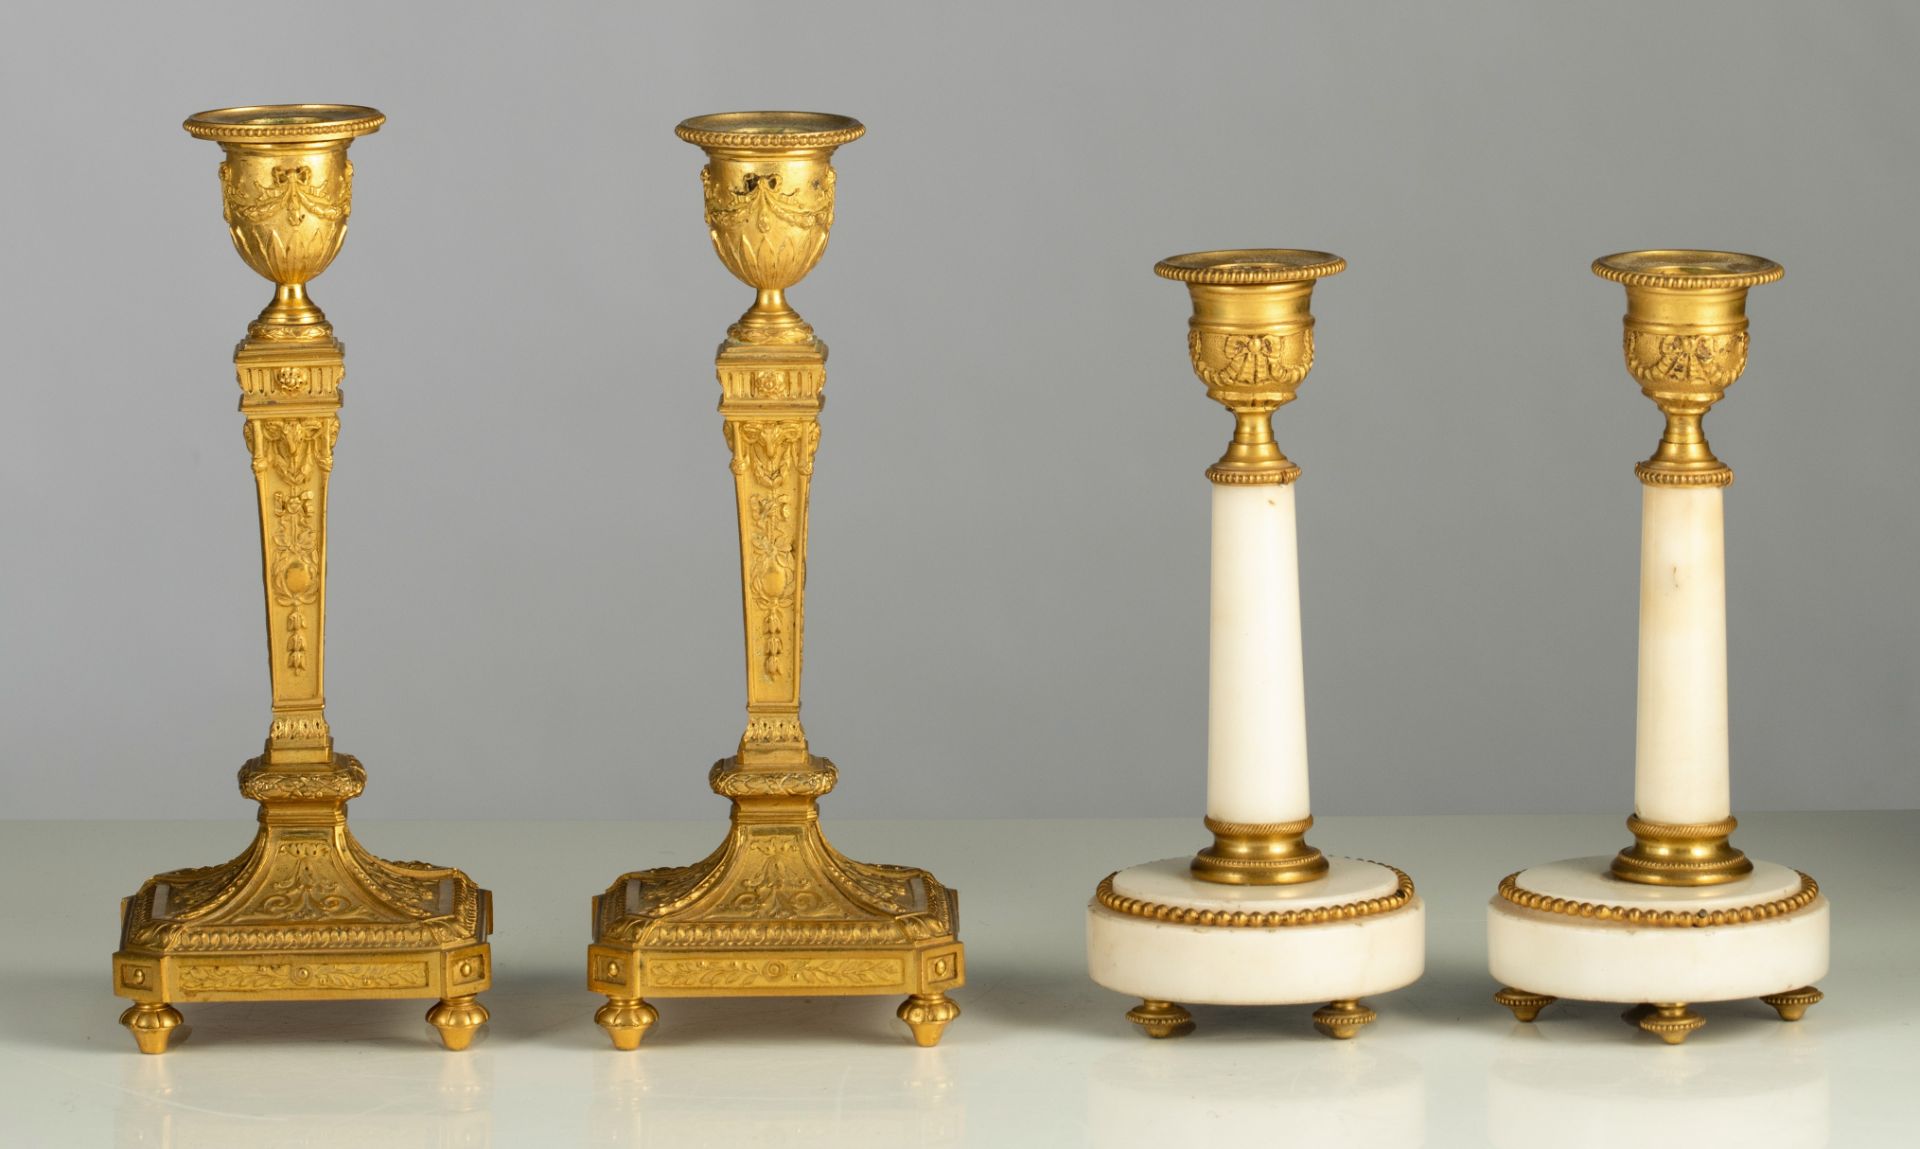 (BIDDING ONLY ON CARLOBONTE.BE) Two pairs of Neoclassical candlesticks, H 17,5 - 21 cm - Image 3 of 8